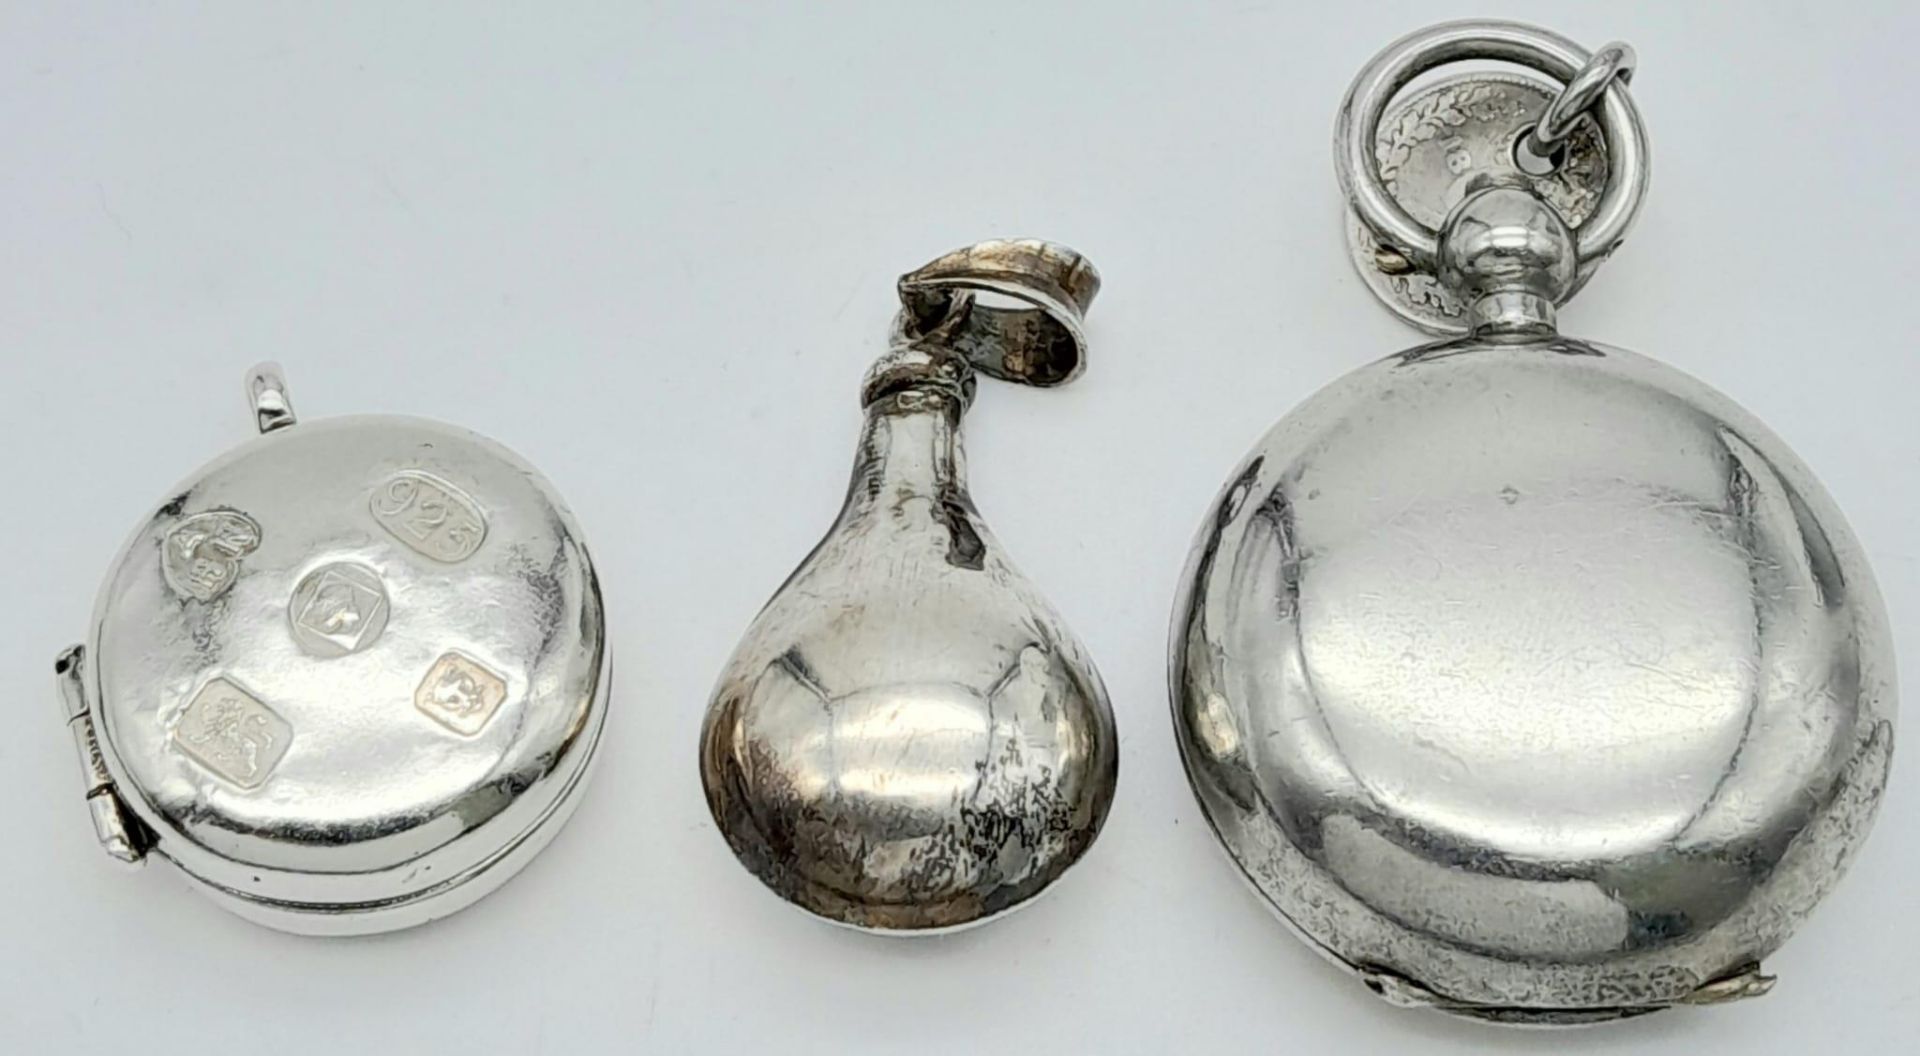 Three Silver Pendant Containers. 4.5cm largest pendant. 40g total weight.